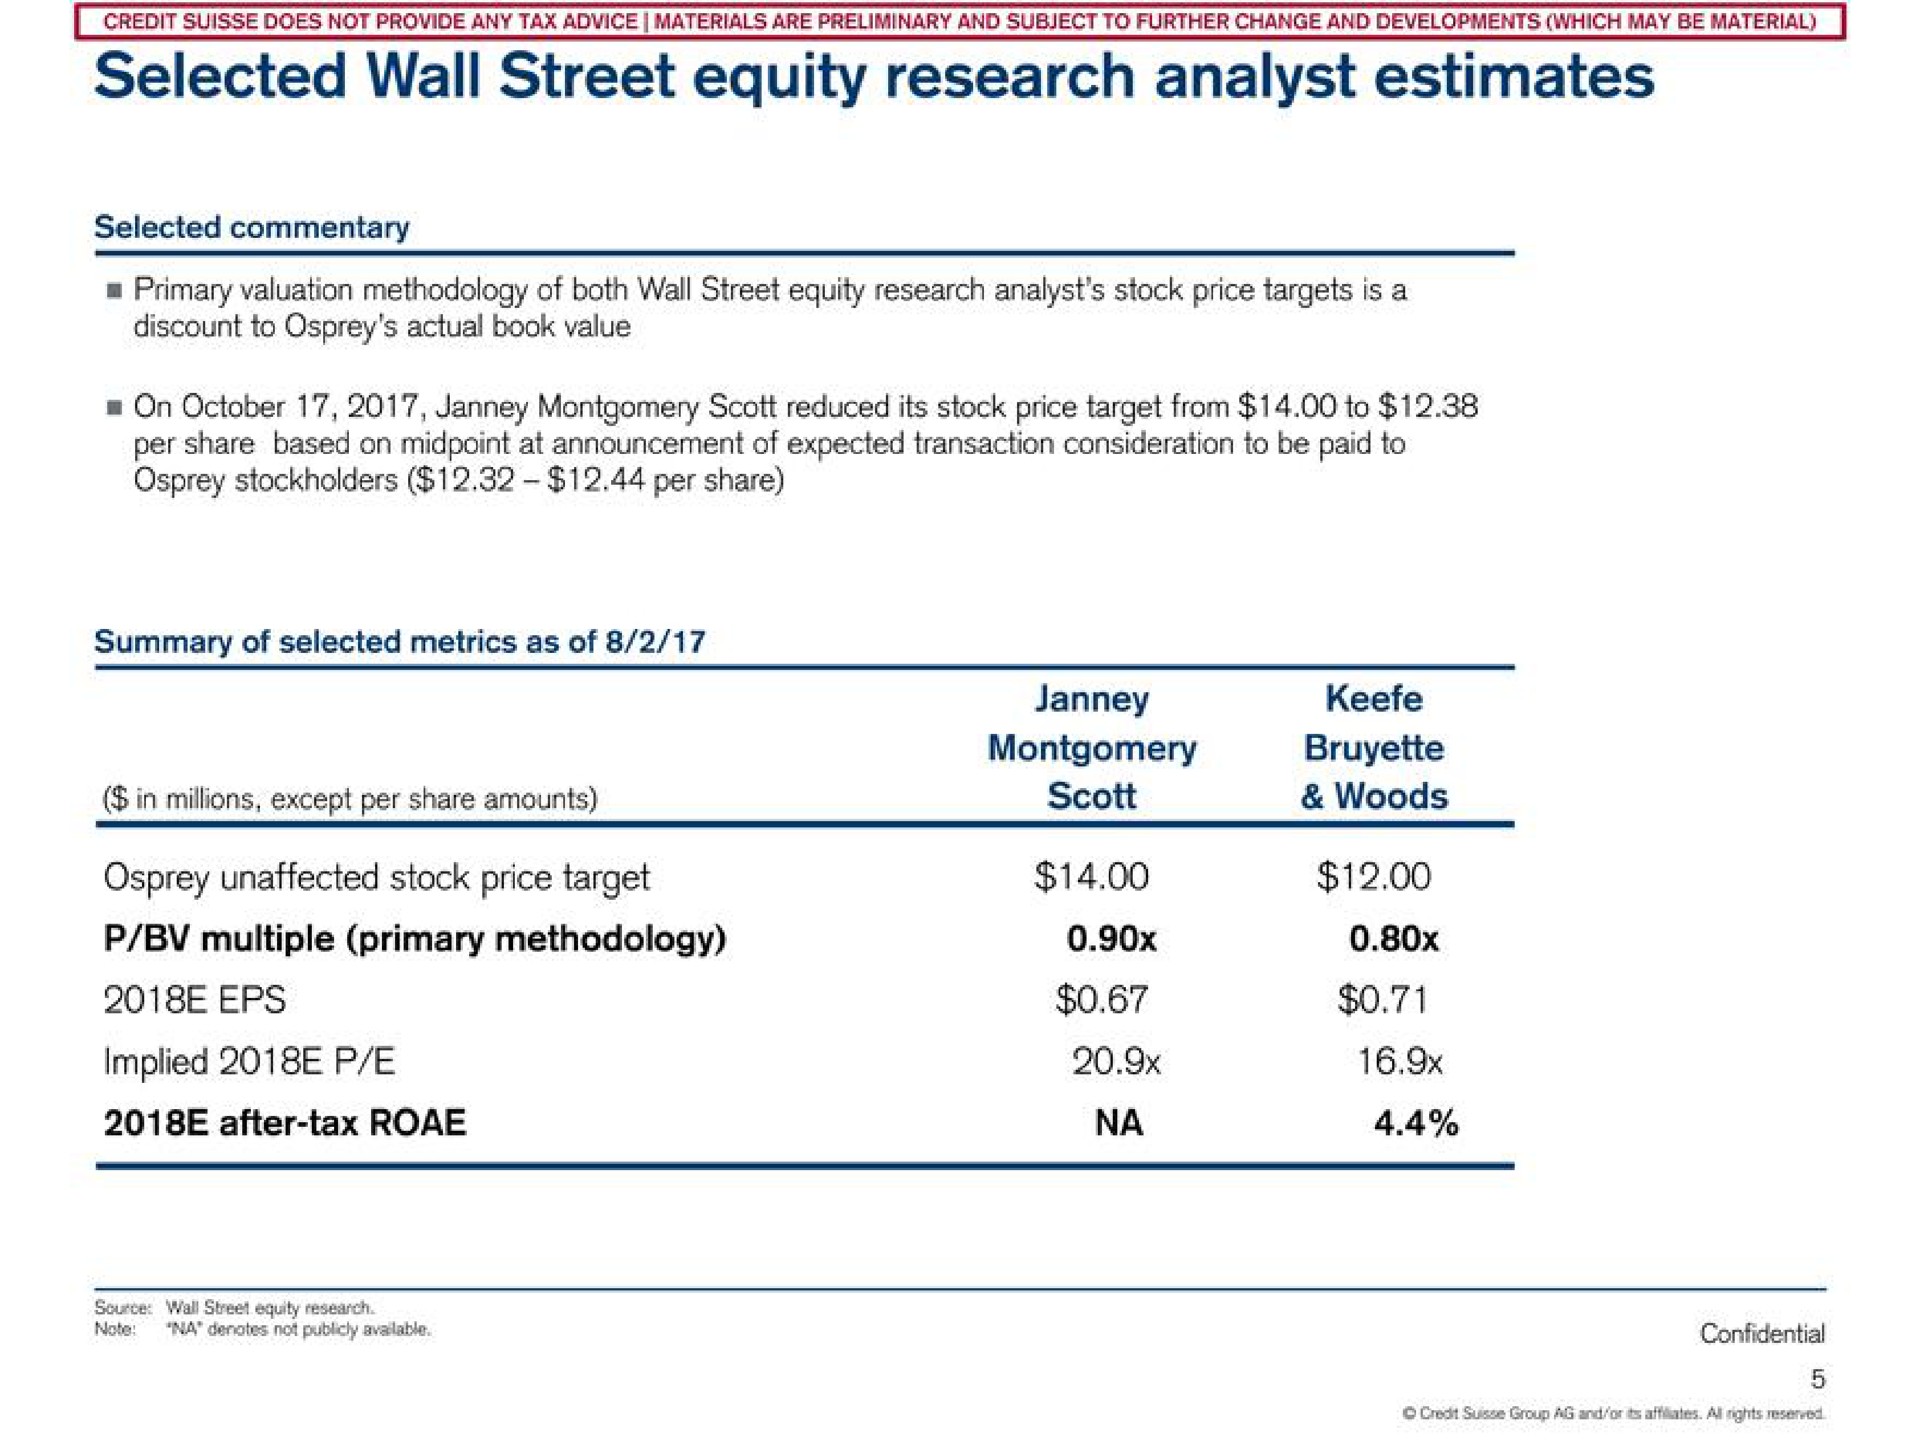 selected wall street equity research analyst estimates osprey unaffected stock price target implied | Credit Suisse